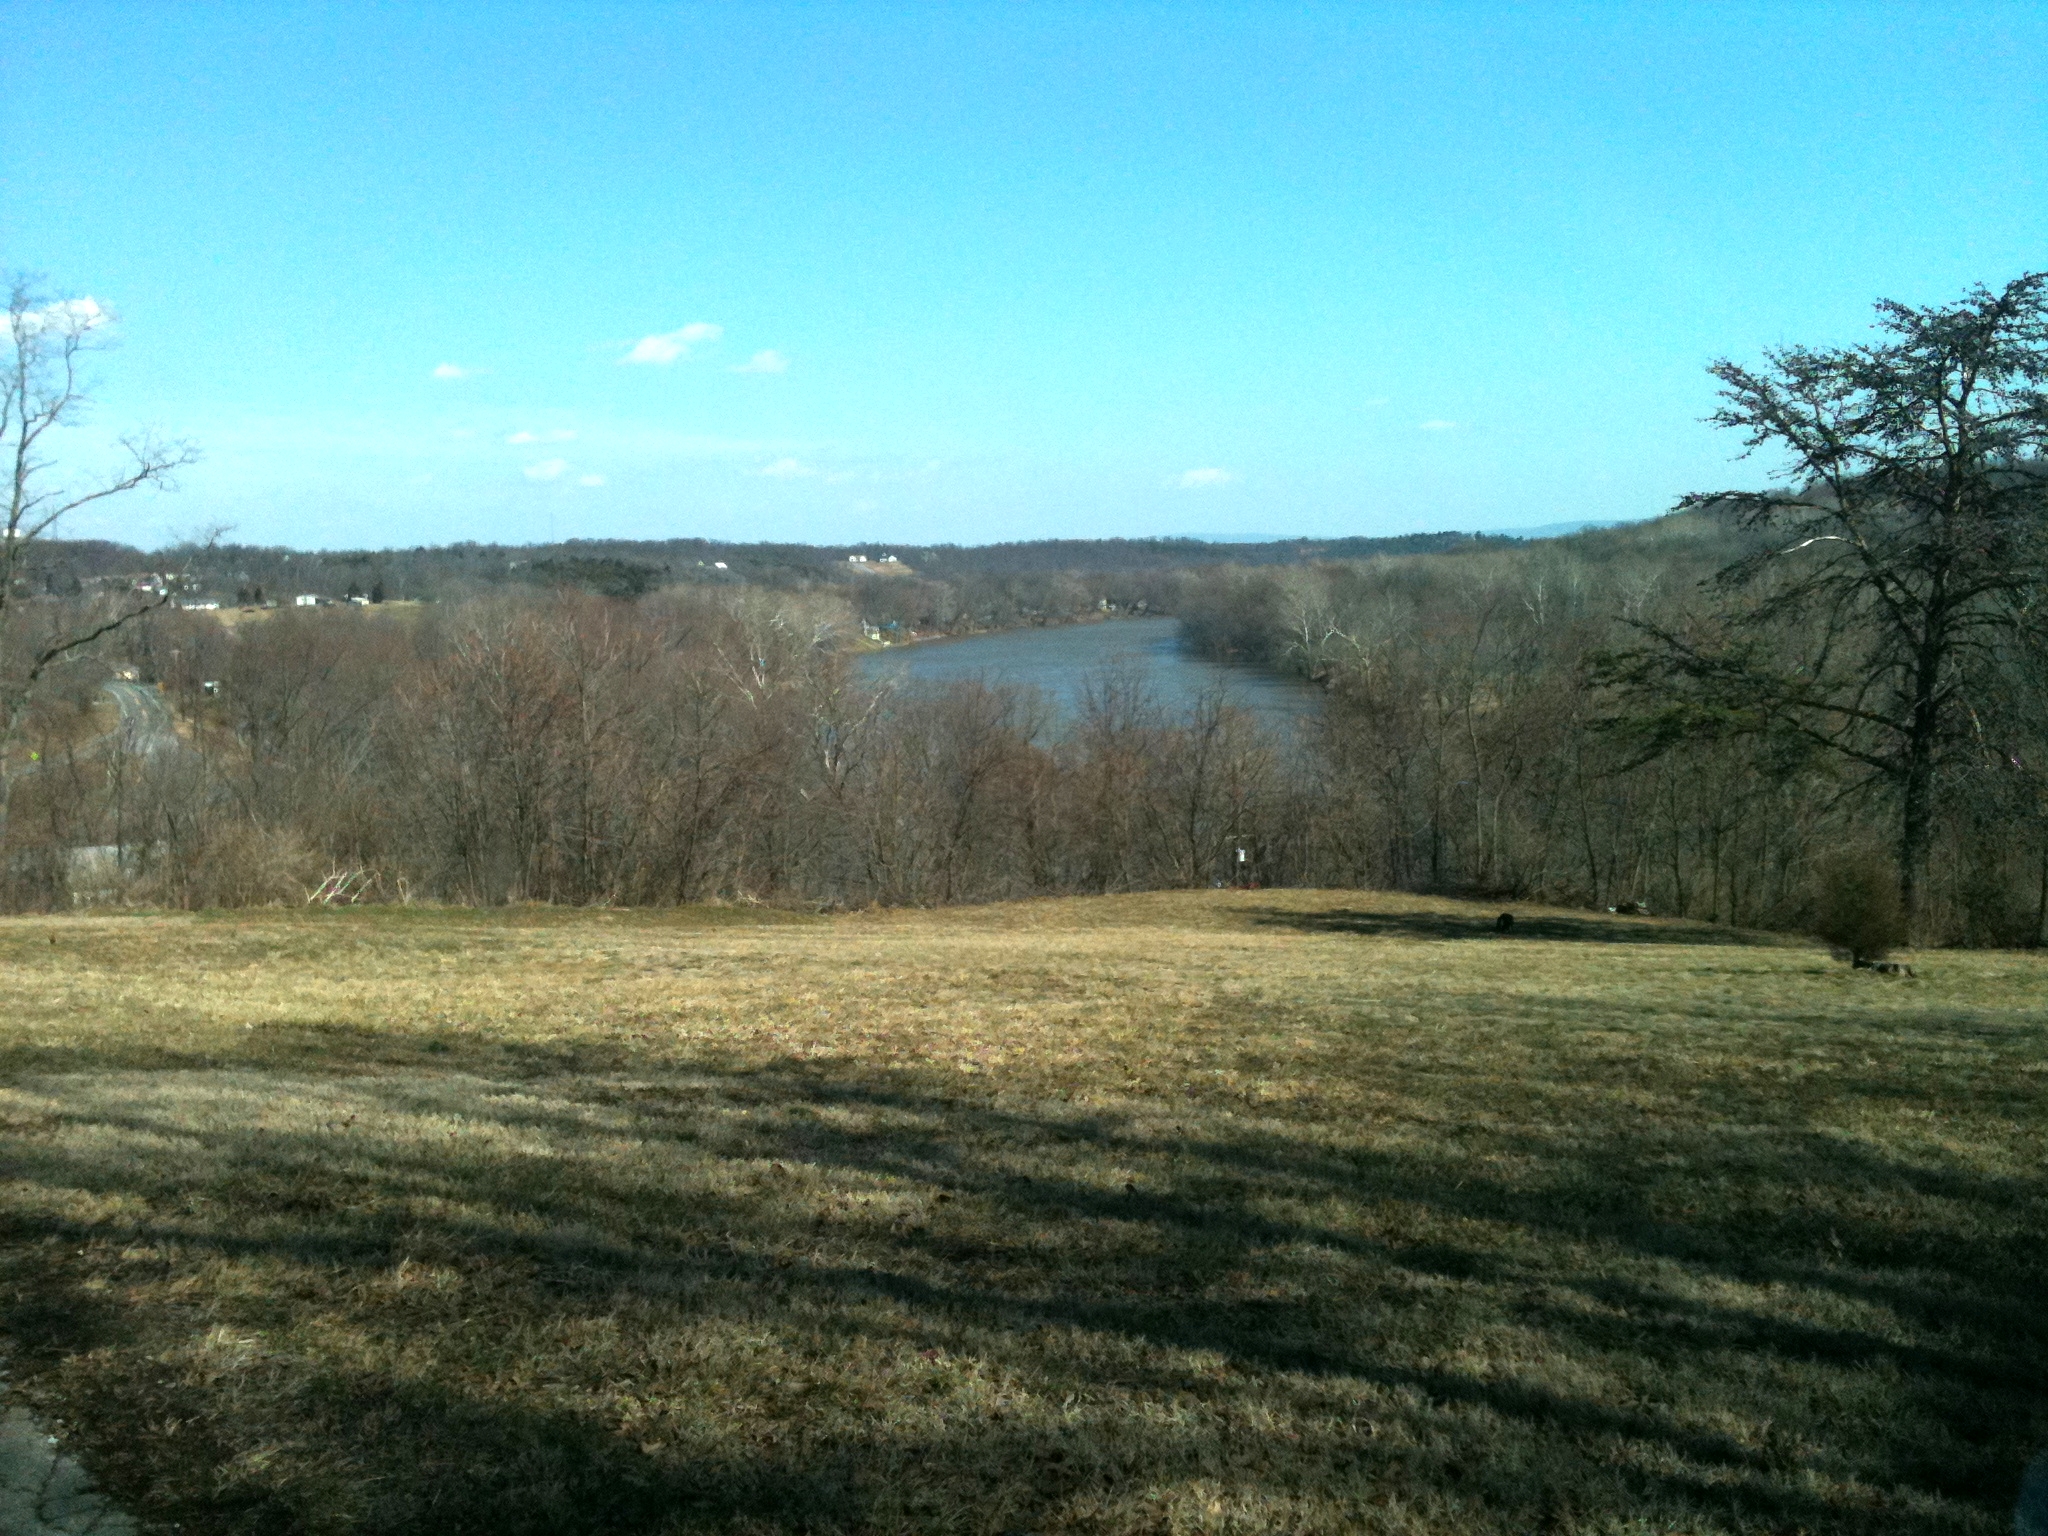 Battlefield Area Looking East at The Potomac River